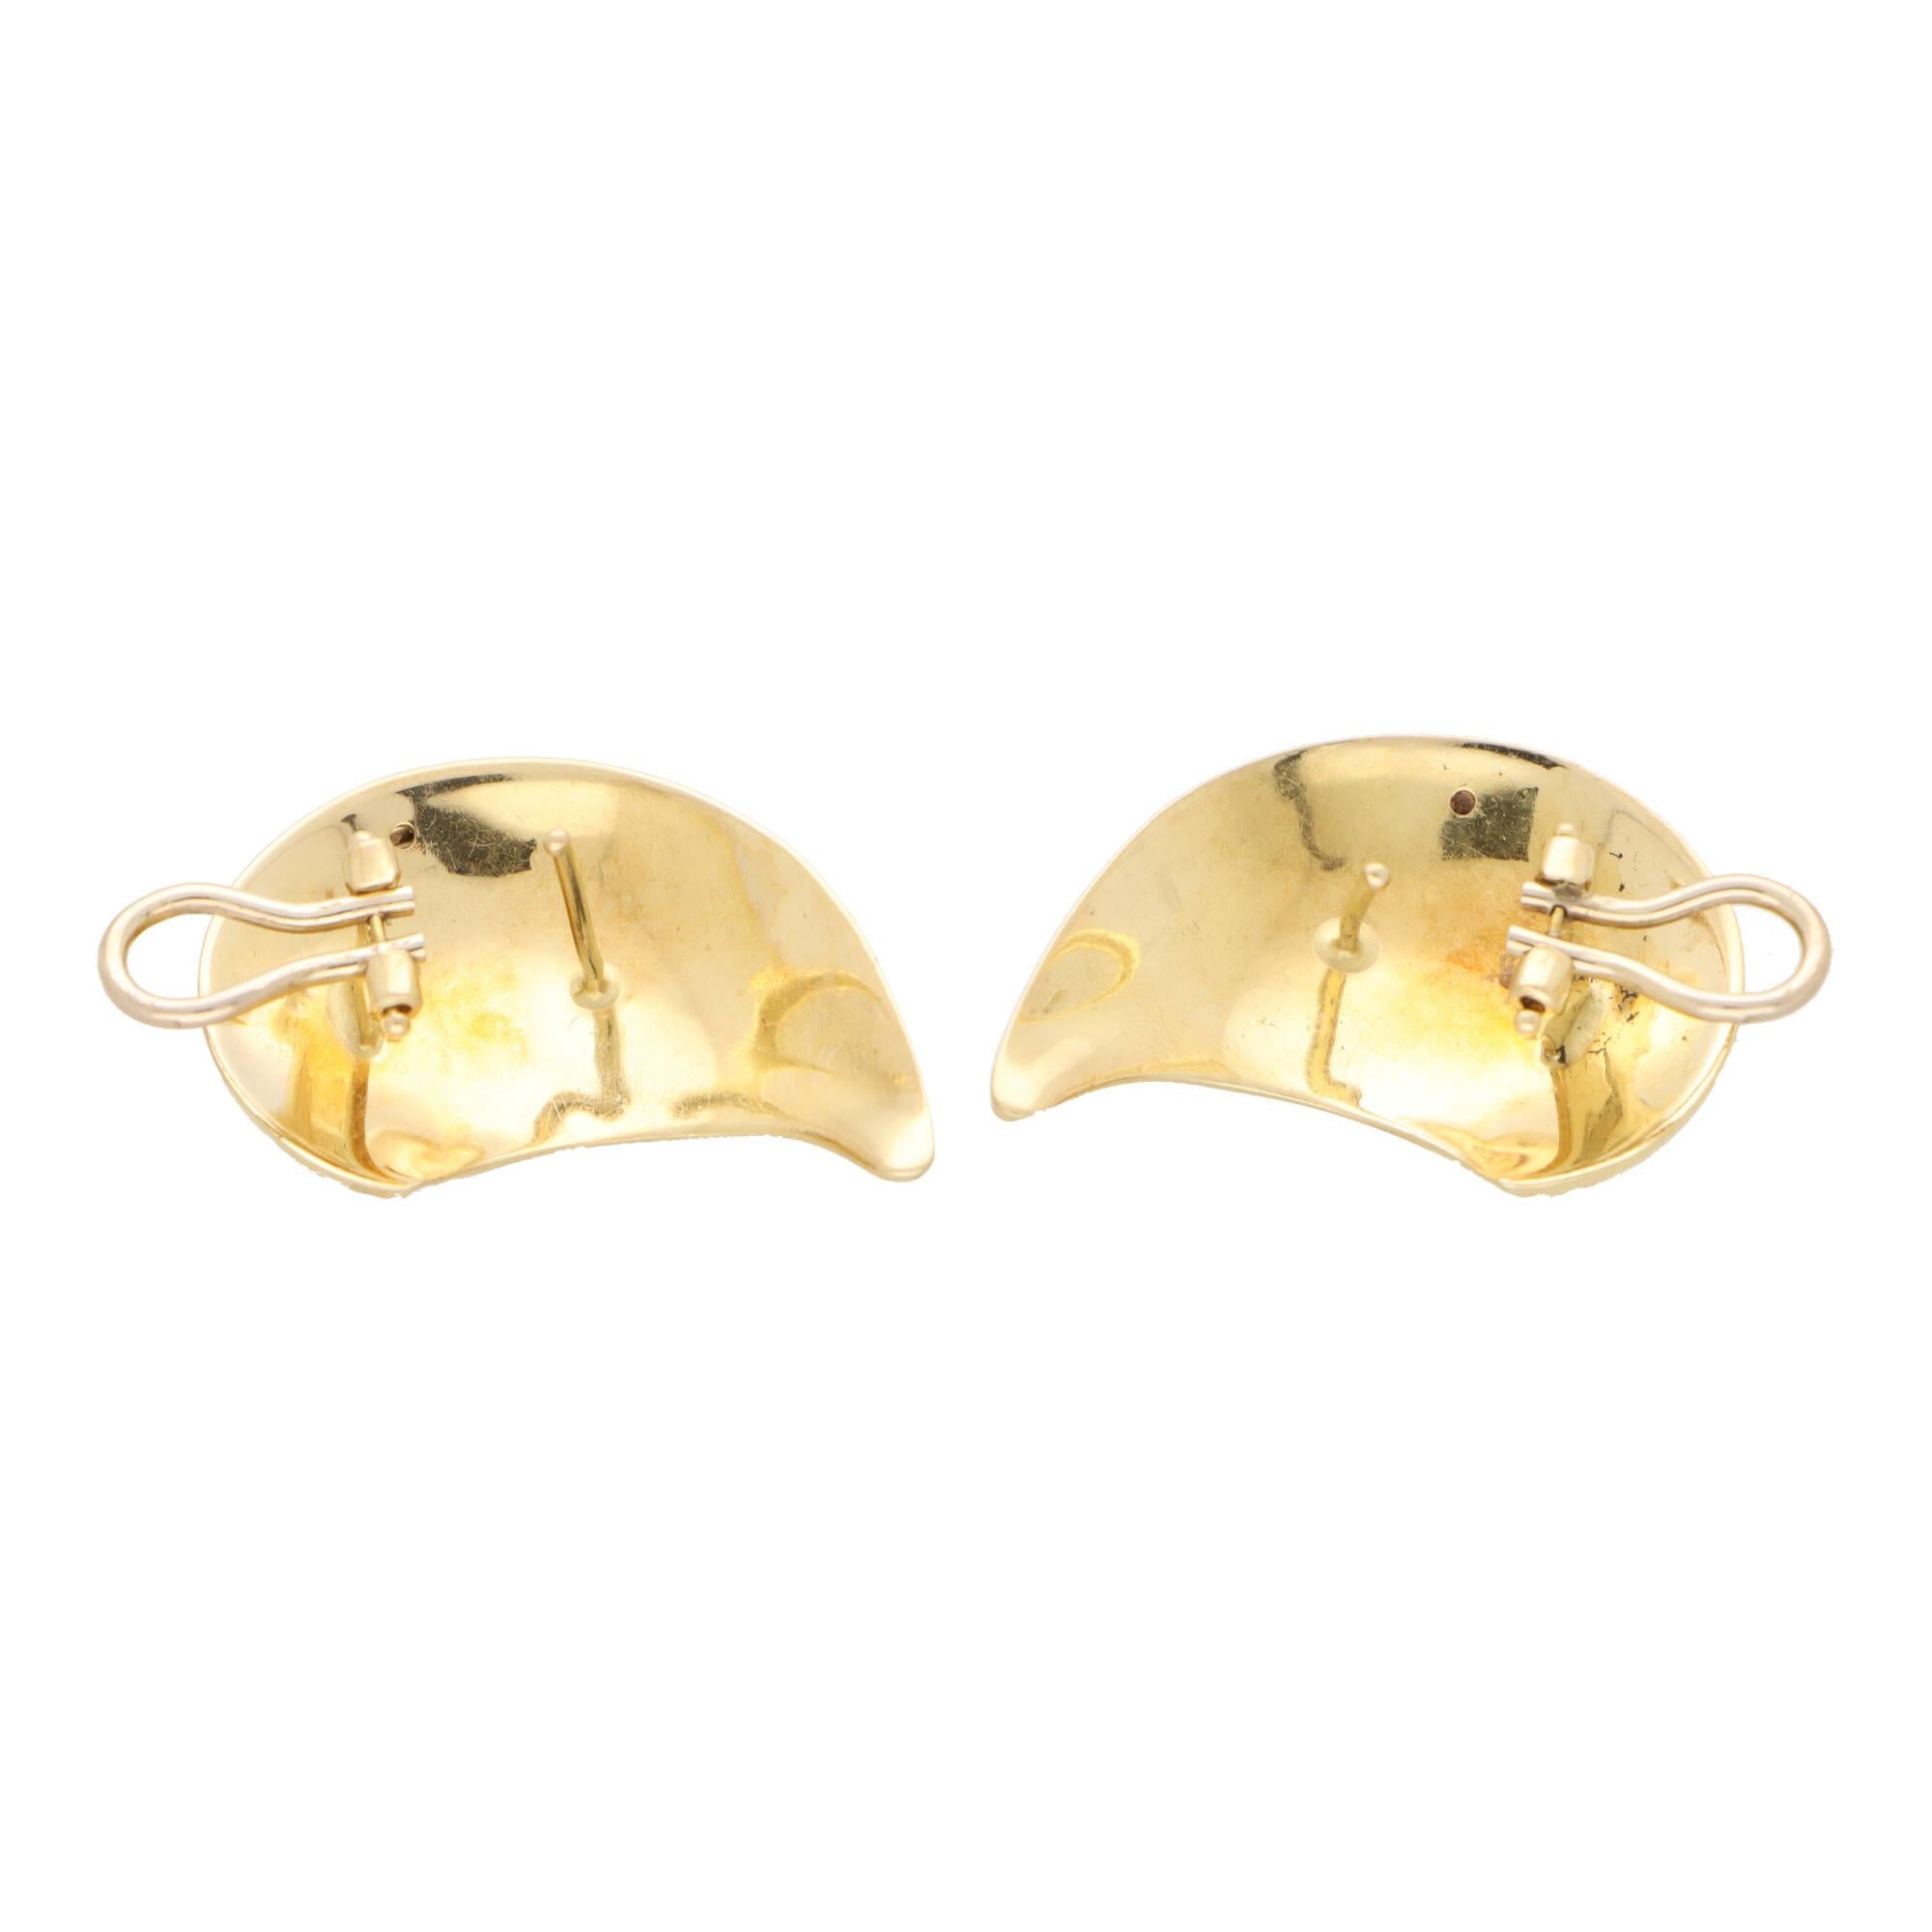 Vintage 1980's Curved Earrings Set in 18k Yellow Gold For Sale 2